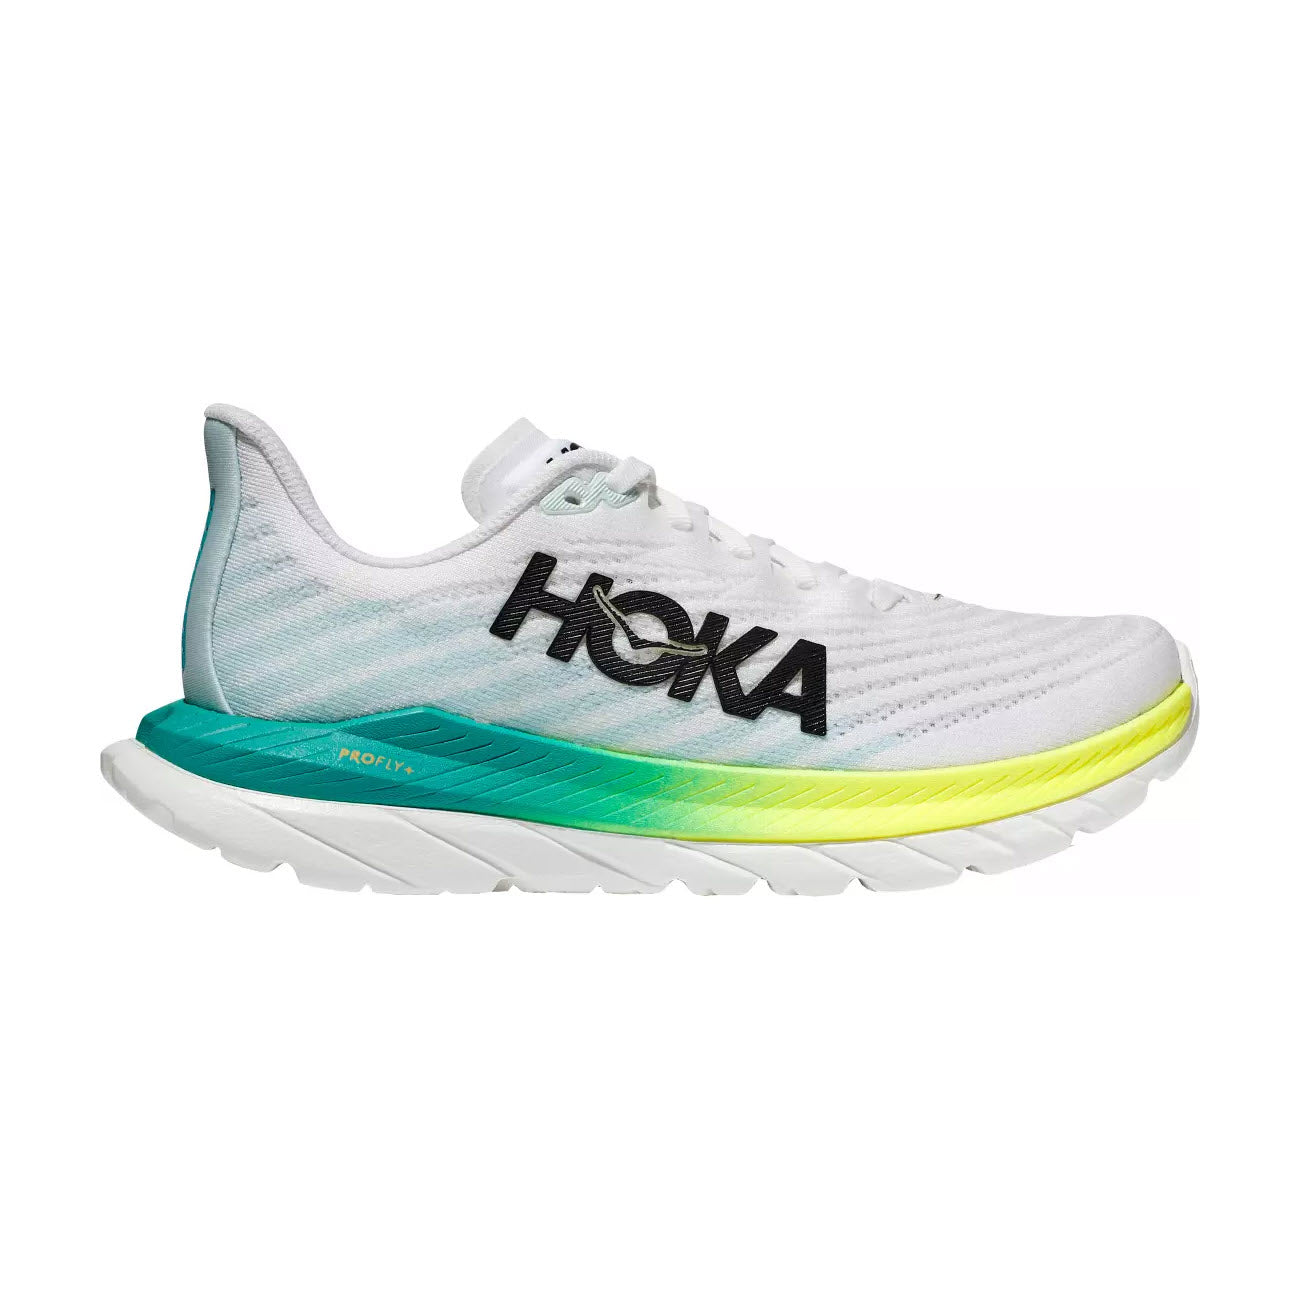 White Hoka Mach 5 performance running shoes with a blue and yellow gradient on the PROFLY midsole and prominent Hoka logo on the side.